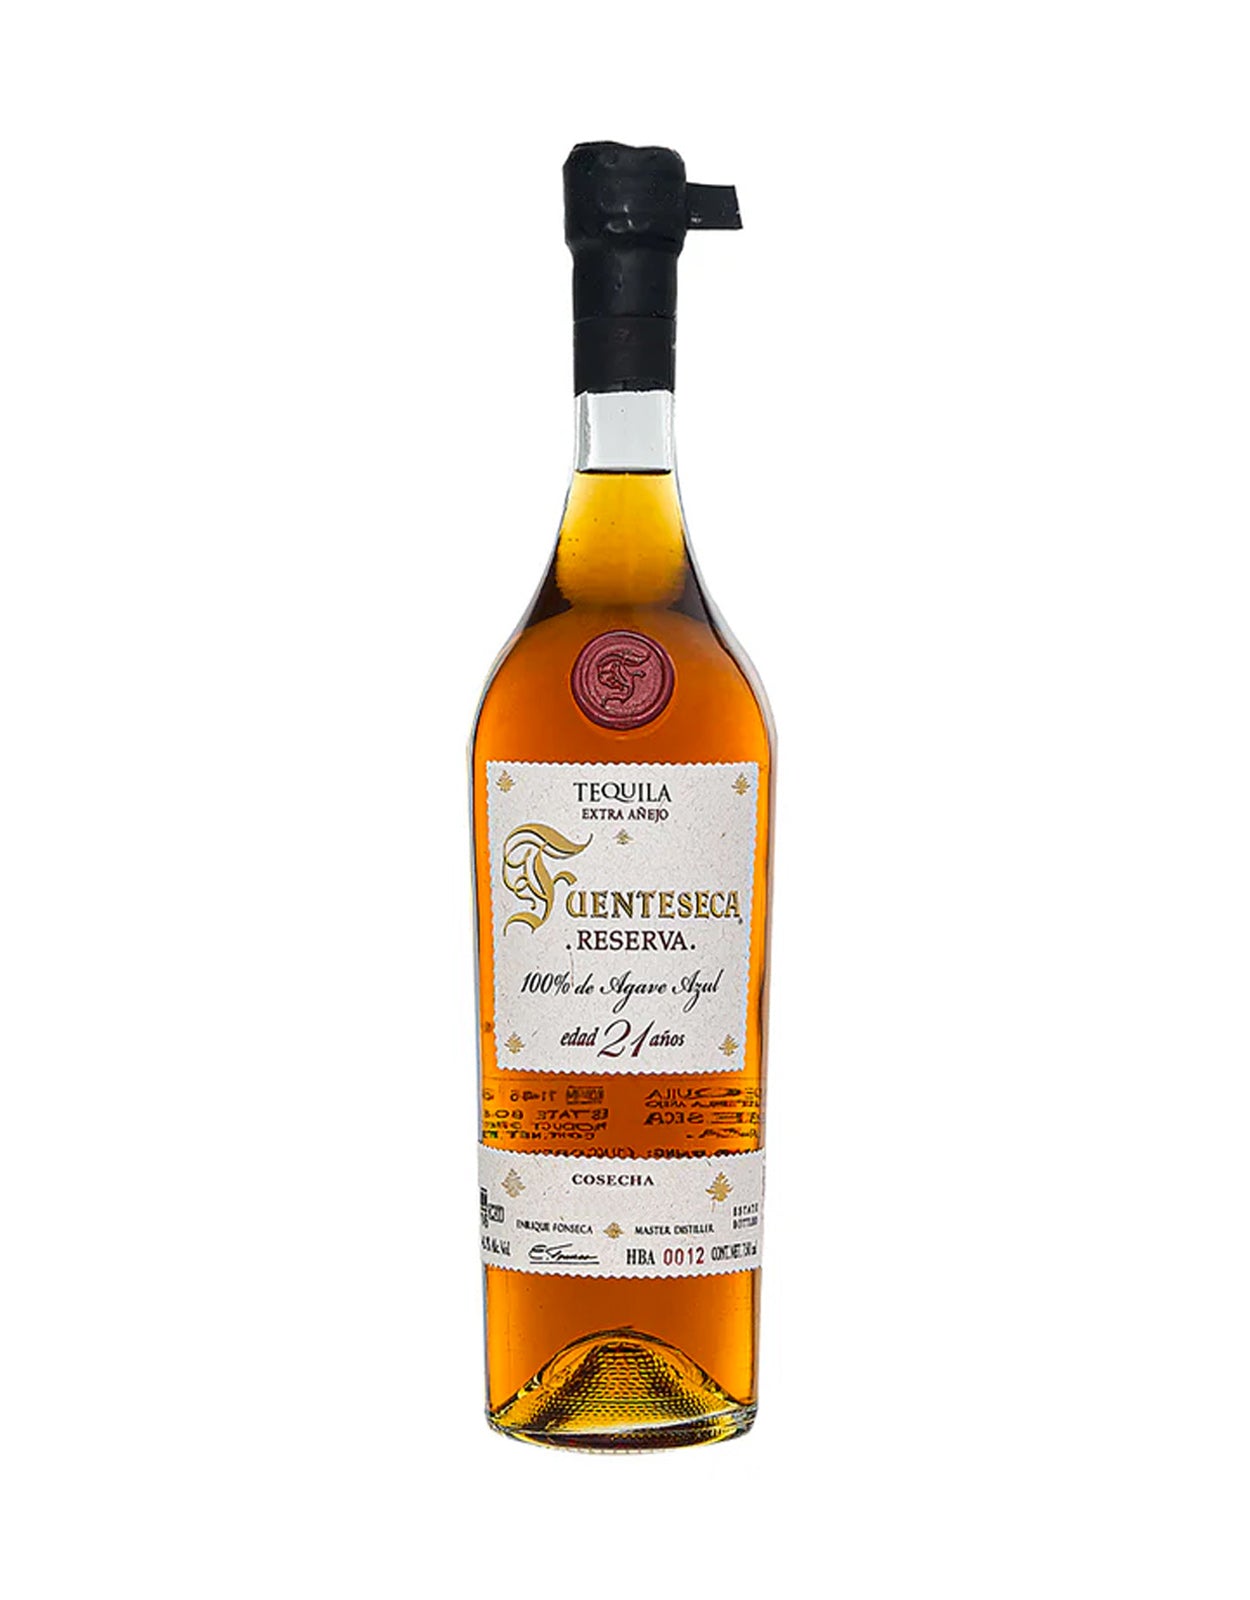 Tequila Fuenteseca Extra Anejo 21 Year Old